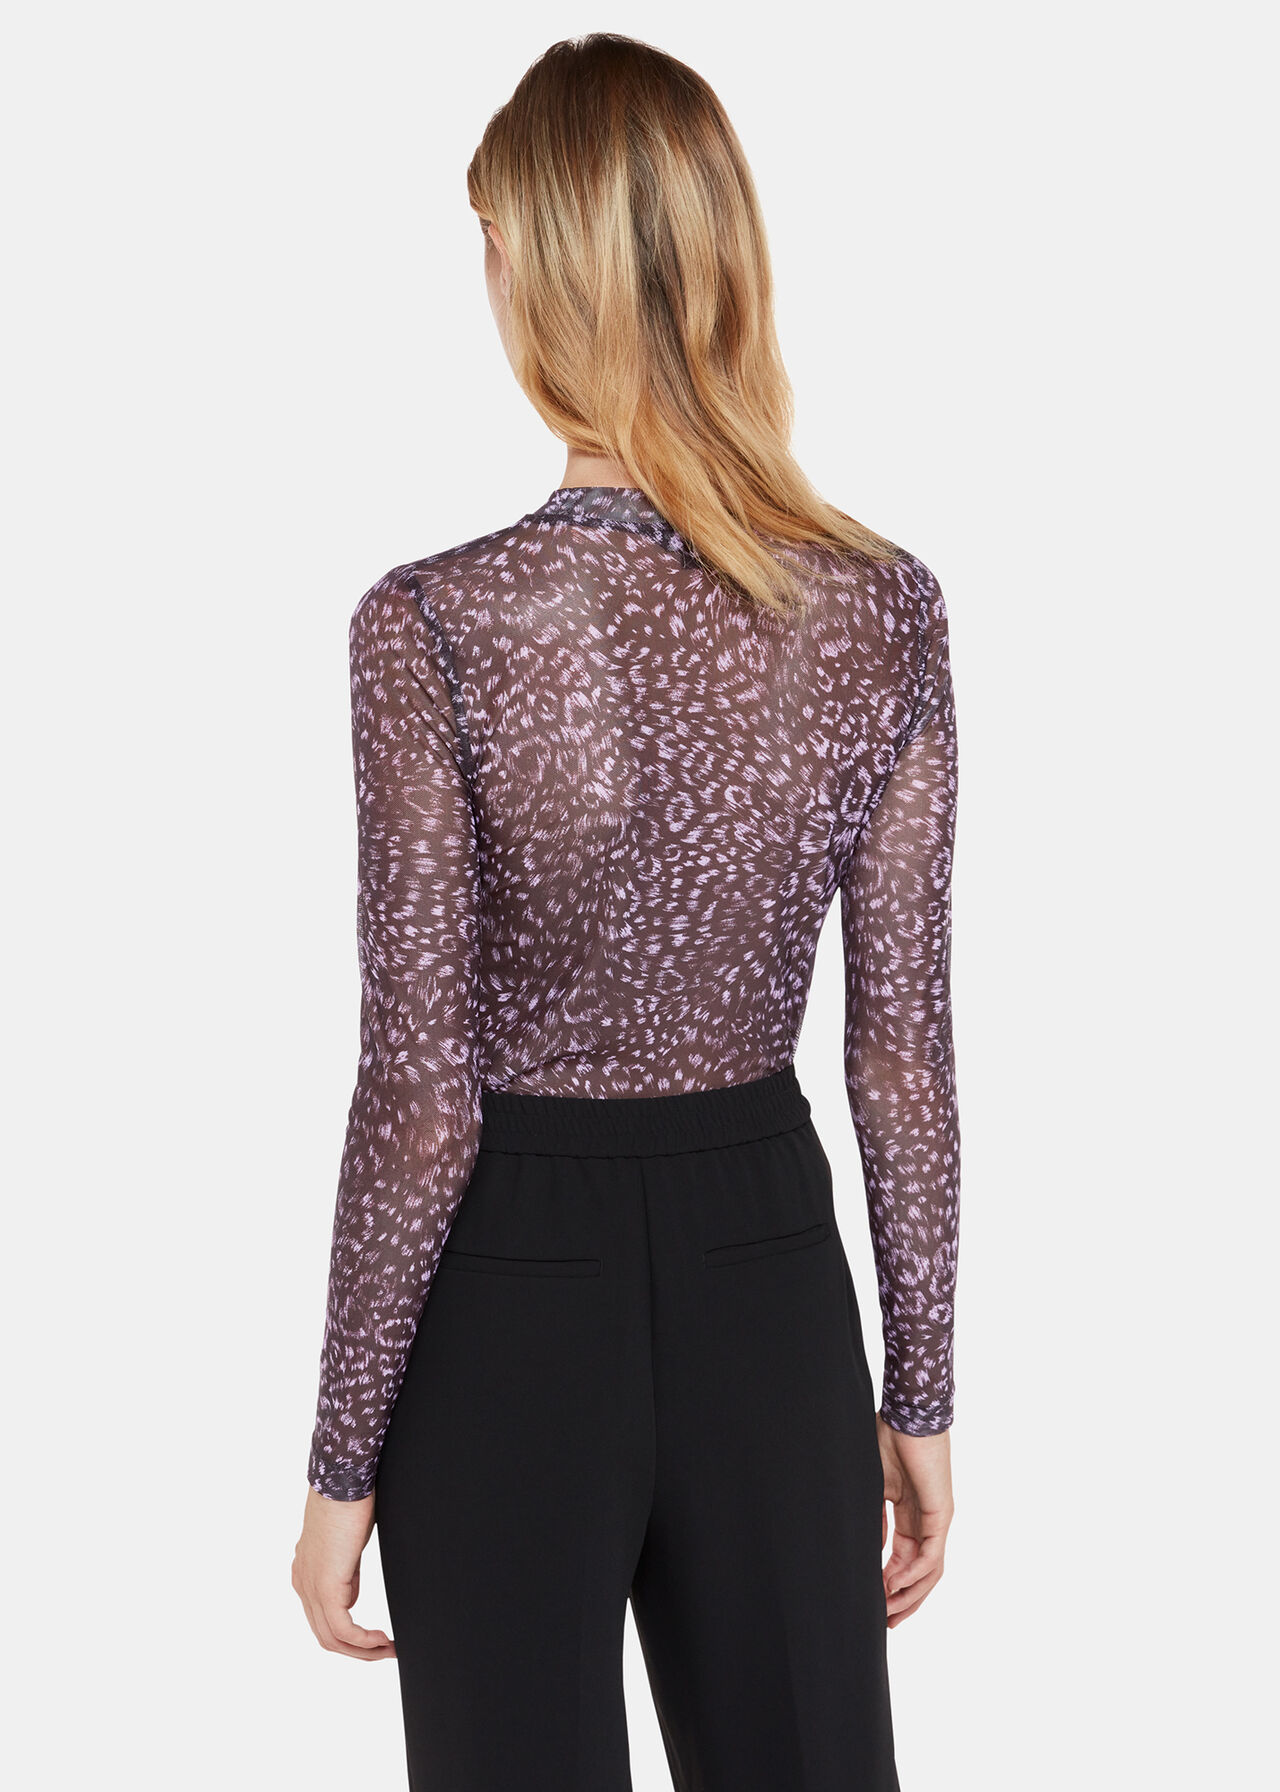 Feather Leopard Mesh Top